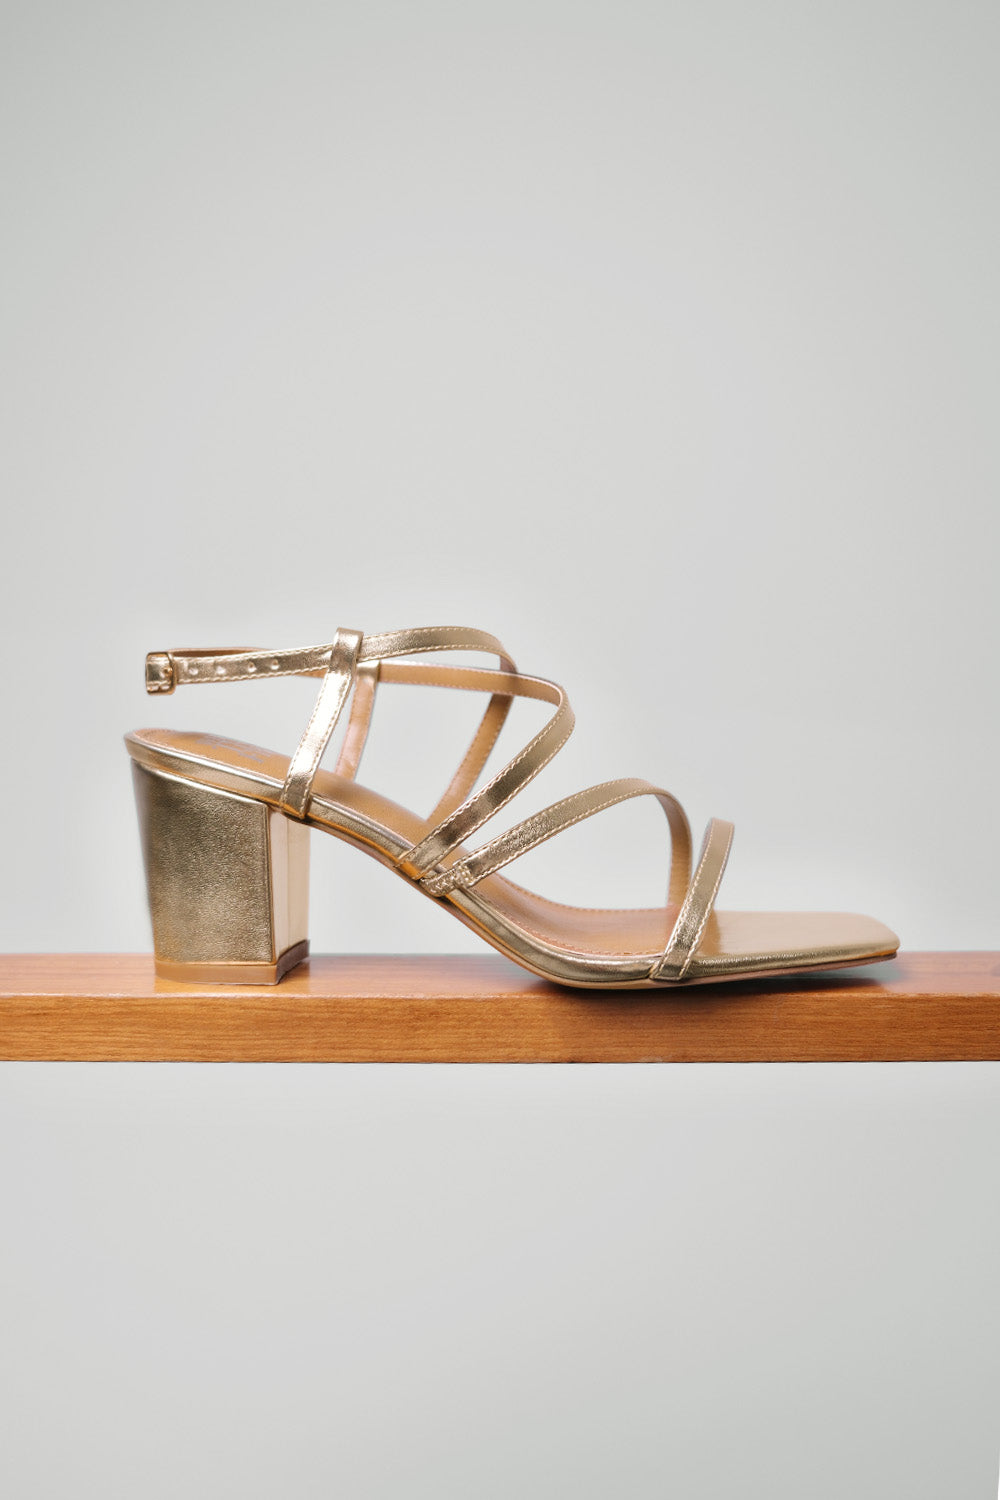 SIDRA WIDE FIT MID HIGH BLOCK HEEL SANDALS WITH CROSS OVER STRAP IN GOLD METALLIC FAUX LEATHER